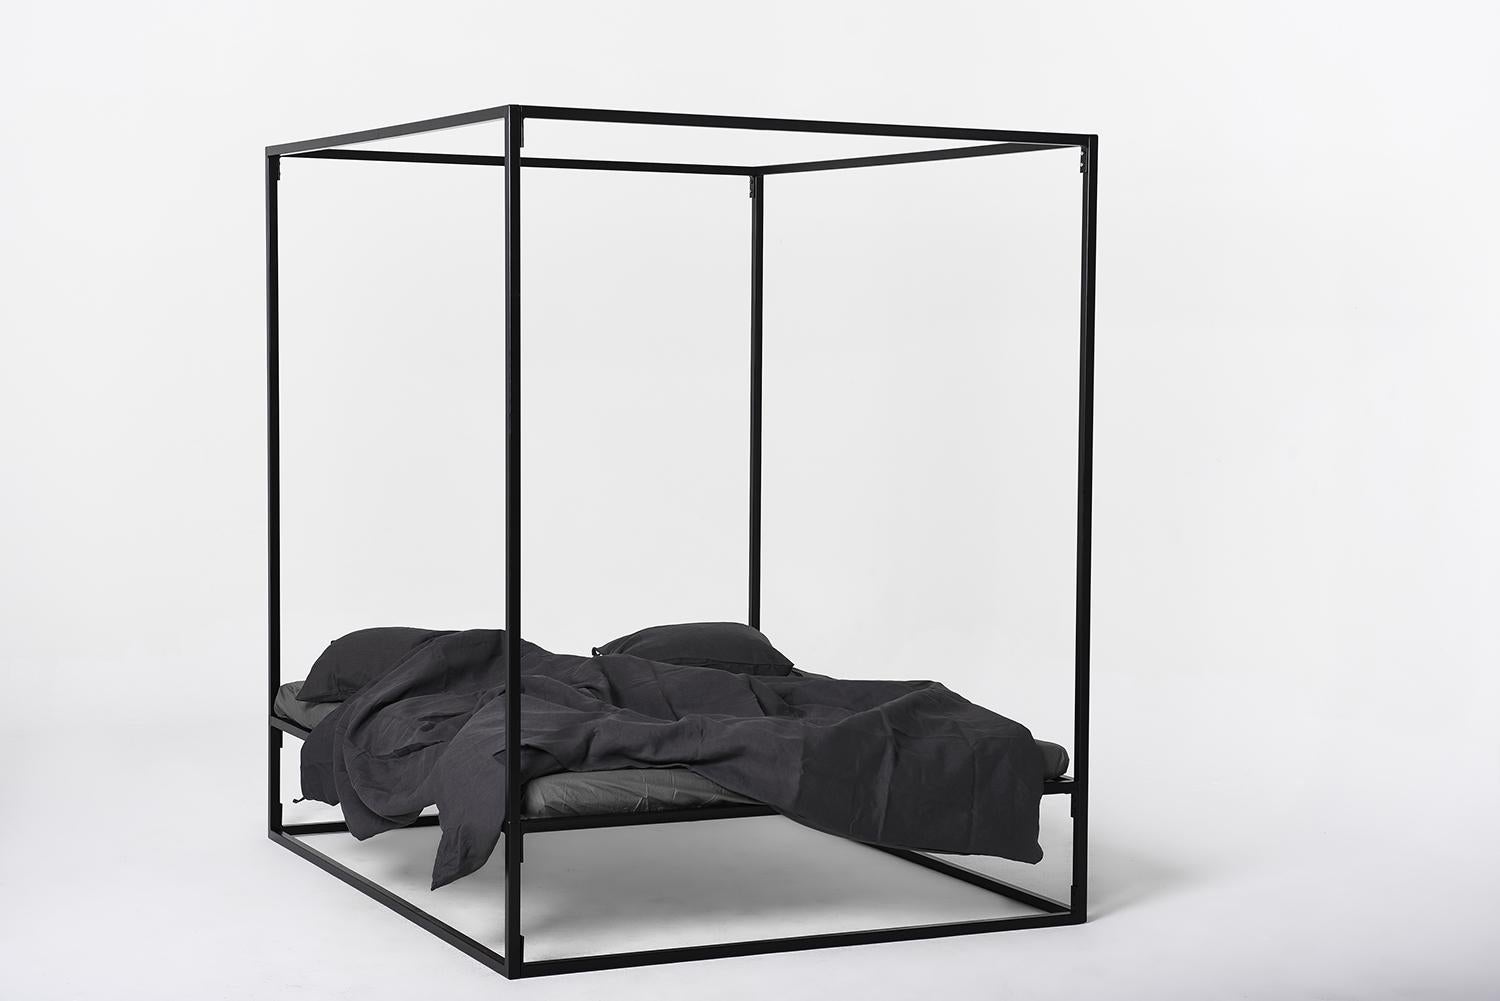 Object 005 the bed by NG Design
Dimensions: D167 x W208 x H210 cm
Materials: powder coated steel.

Also available: all of objects available in different materials and colors on demand. 

The 